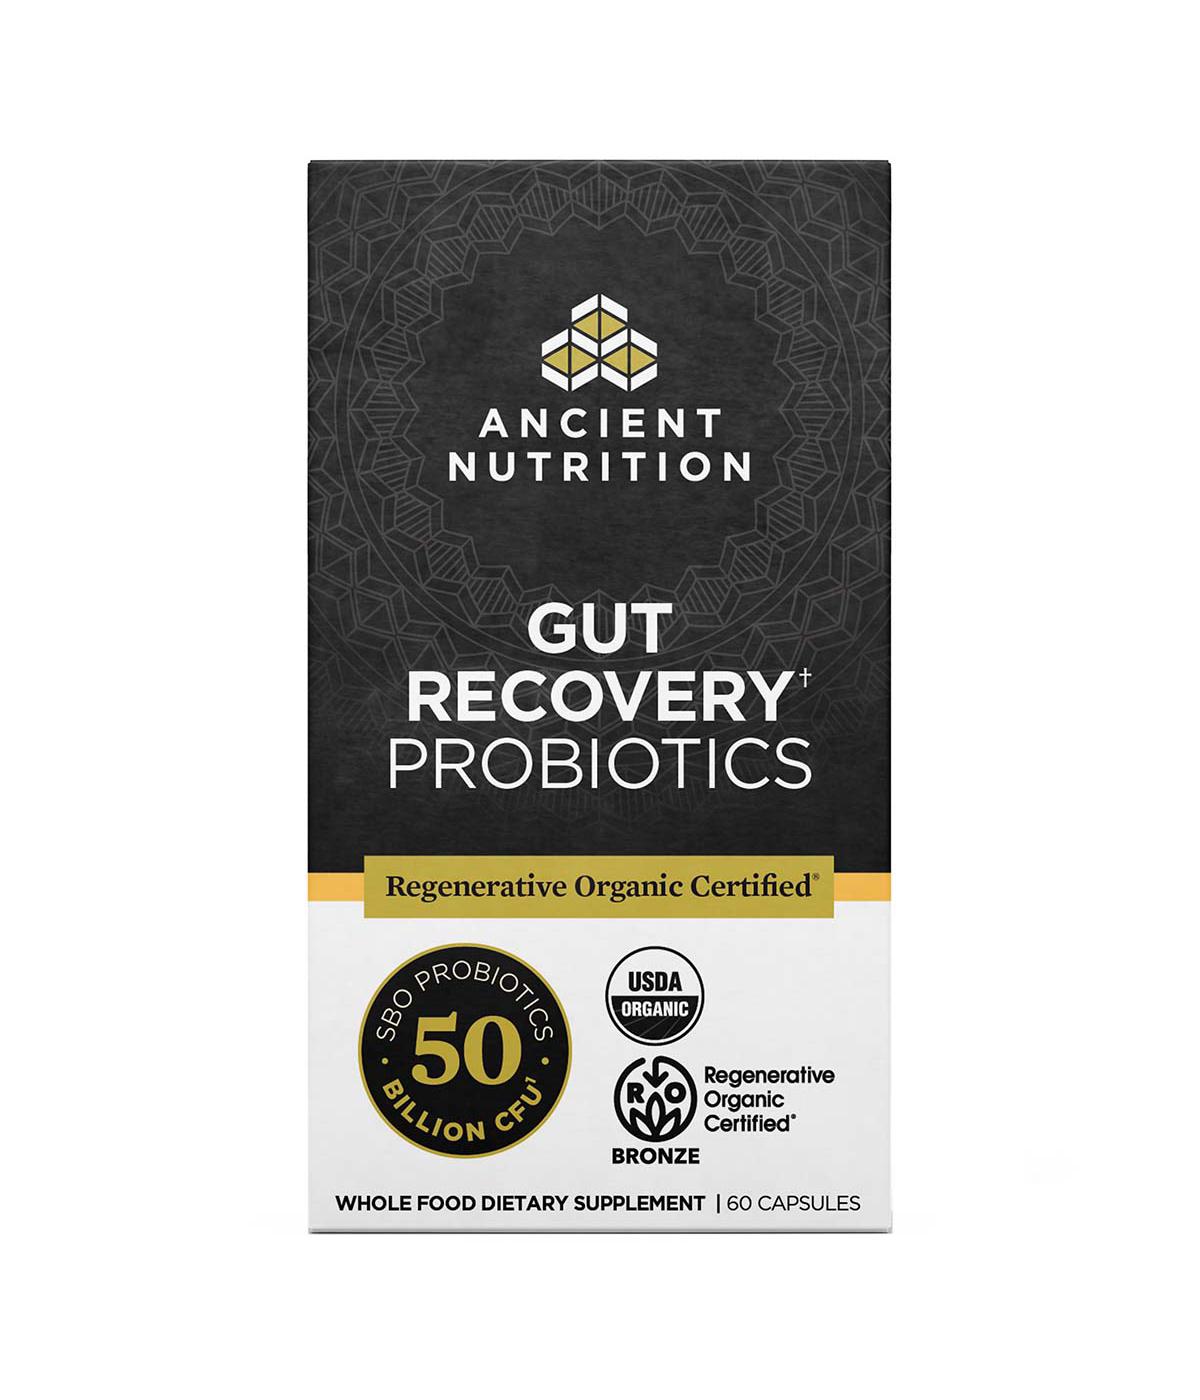 Ancient Nutrition Gut Recovery Probiotics Capsules; image 1 of 5